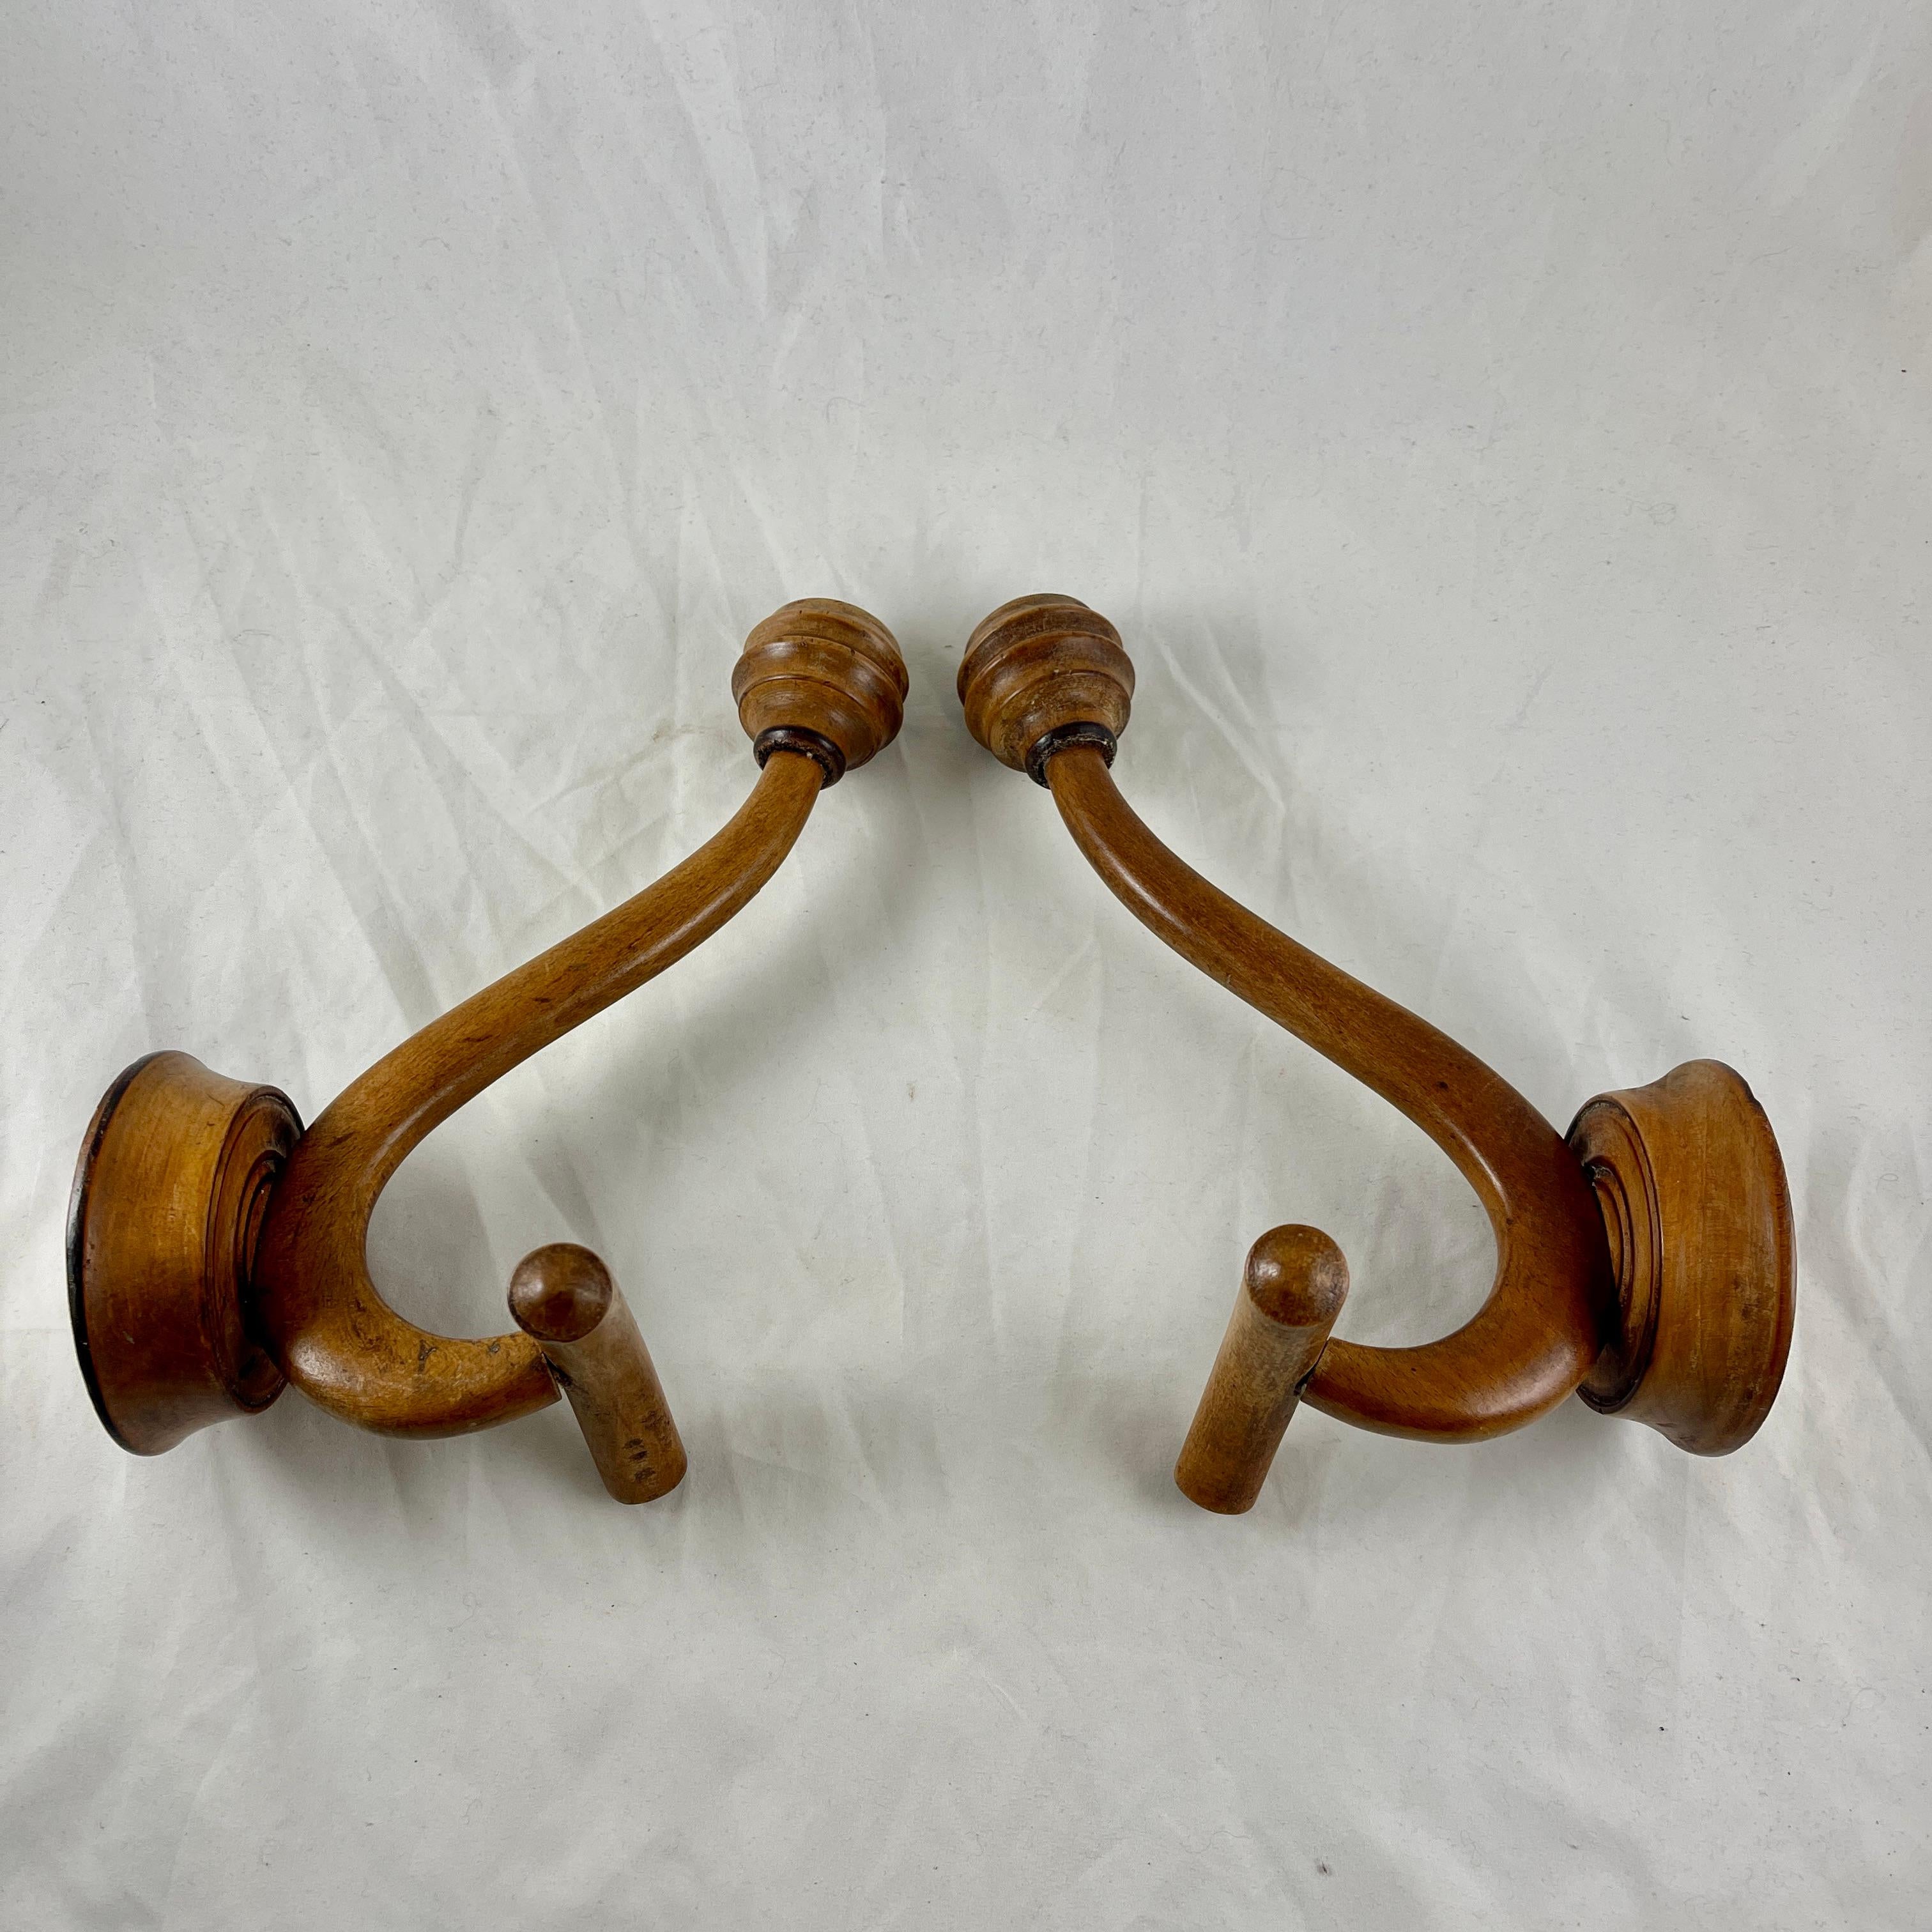 Early 20th Century French Art Nouveau Bentwood Coat & Hat Hooks, a Pair For Sale